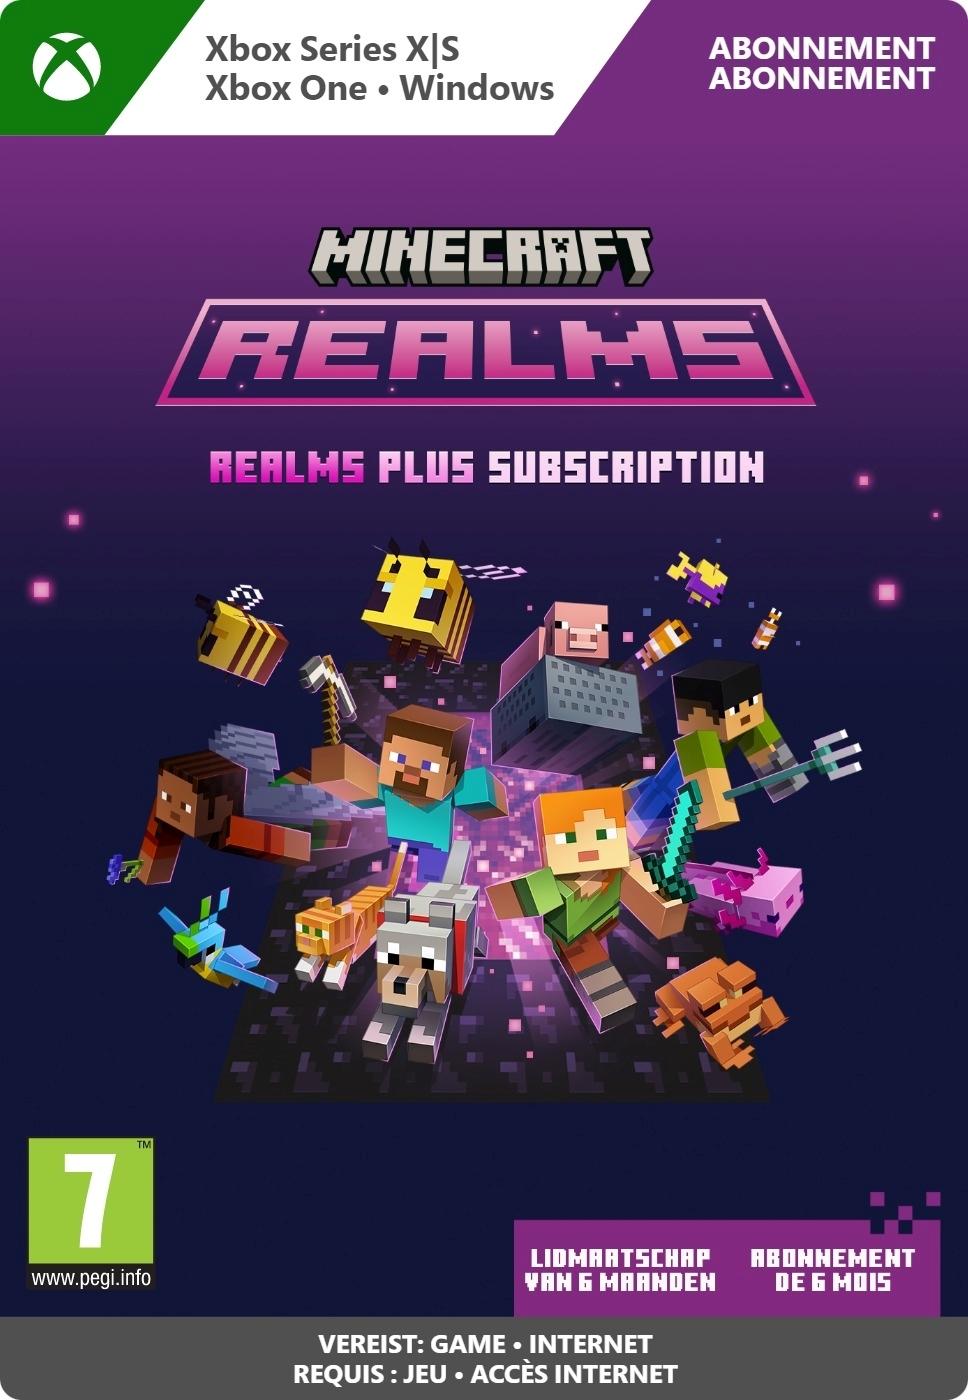 Minecraft Realms Plus 6-Month Subscription - Xbox Series X/Xbox One/Win10 - Subscription | 7LM-00050 (0582157c-36ad-5743-a657-550c0ffcf819)